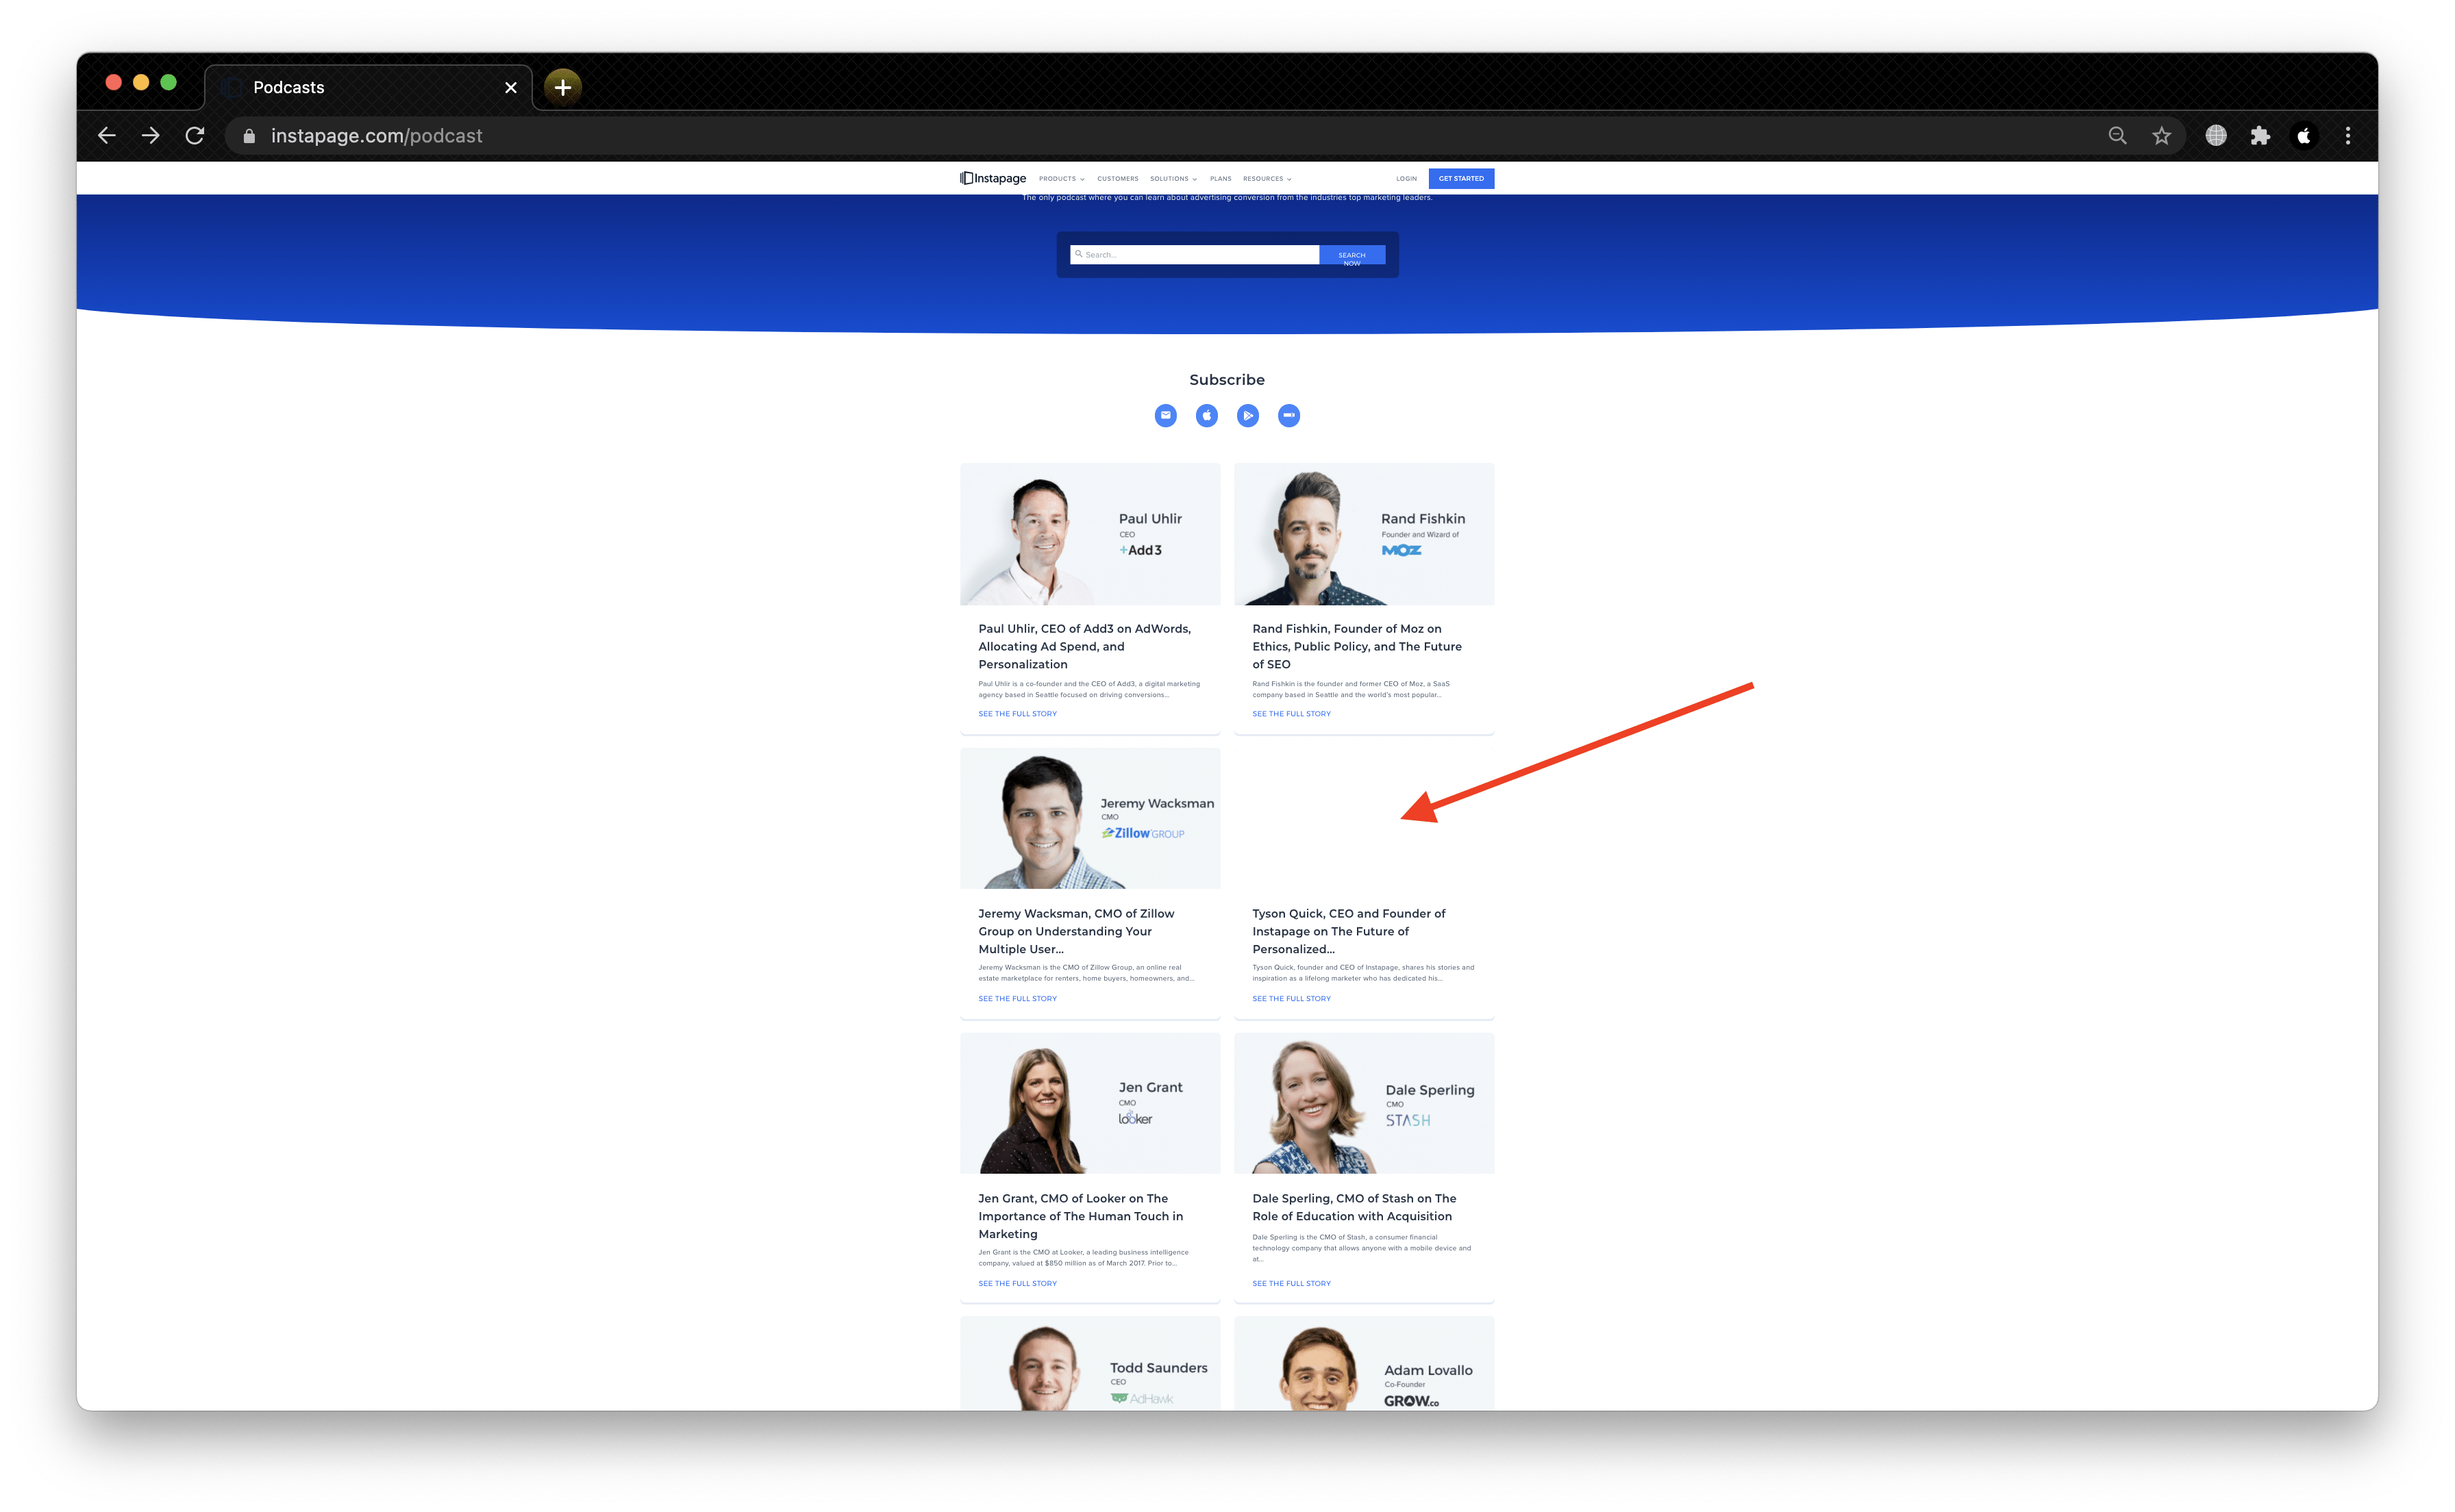 CEO’s photo is missing on the podcast page